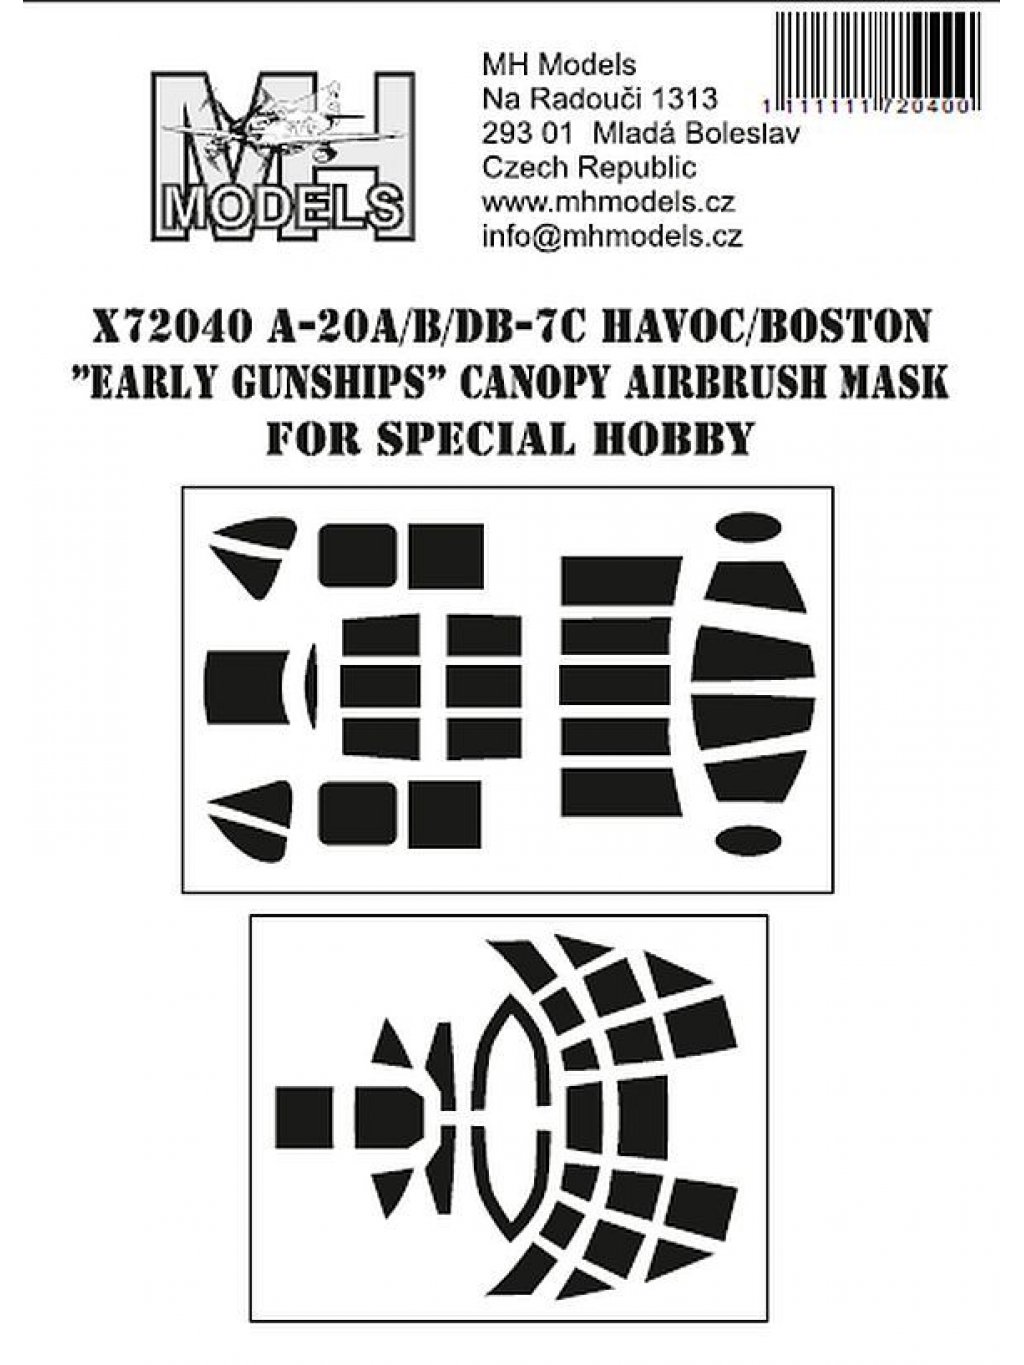 A-20A/B/DB-7C Havoc/Boston "Early Gunships" canopy airbrush mask for Special Hobby